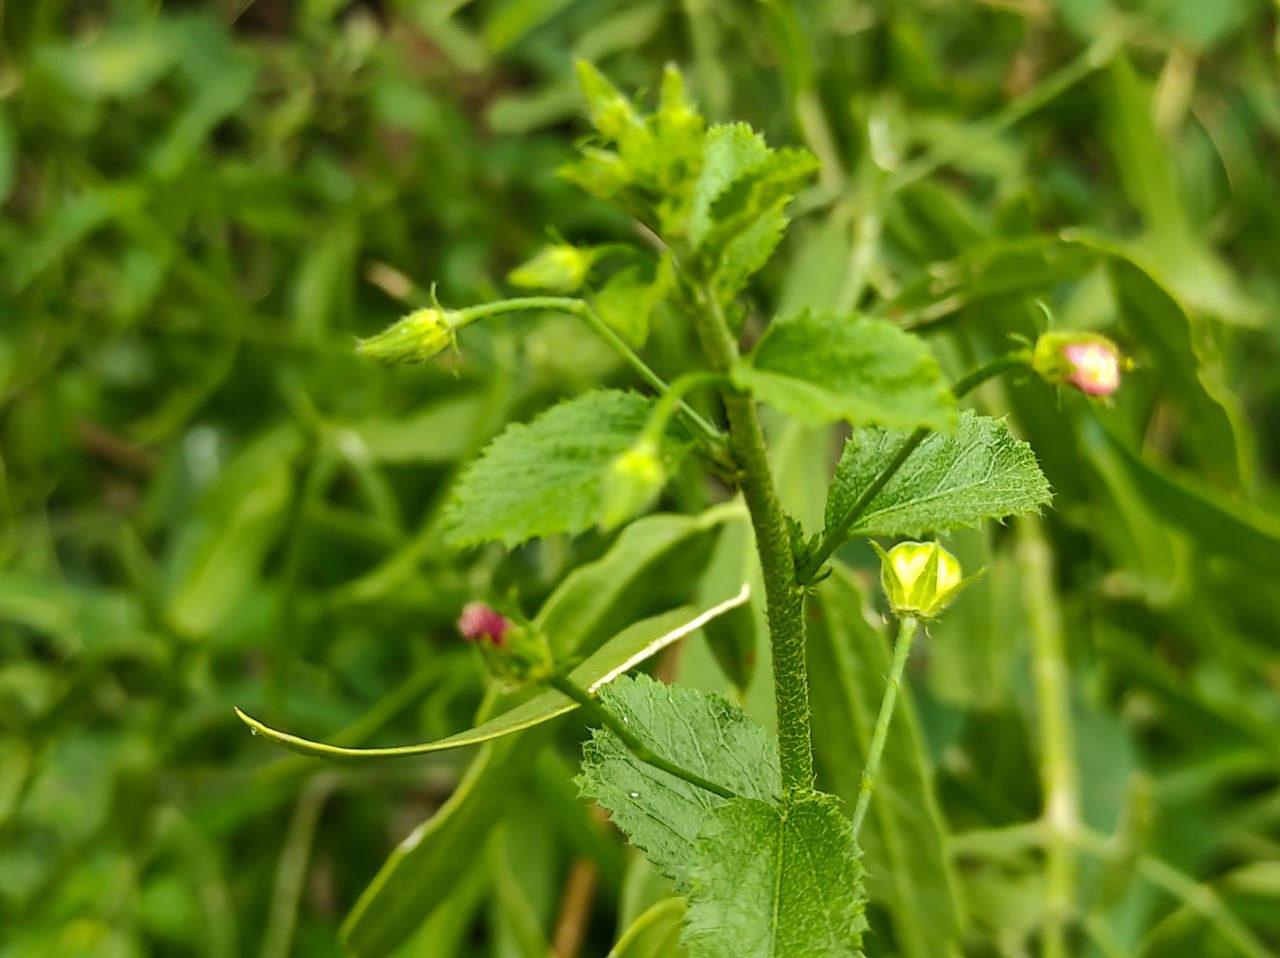 CLOSE-UP OF GREEN FLOWERING PLANT ON LAND